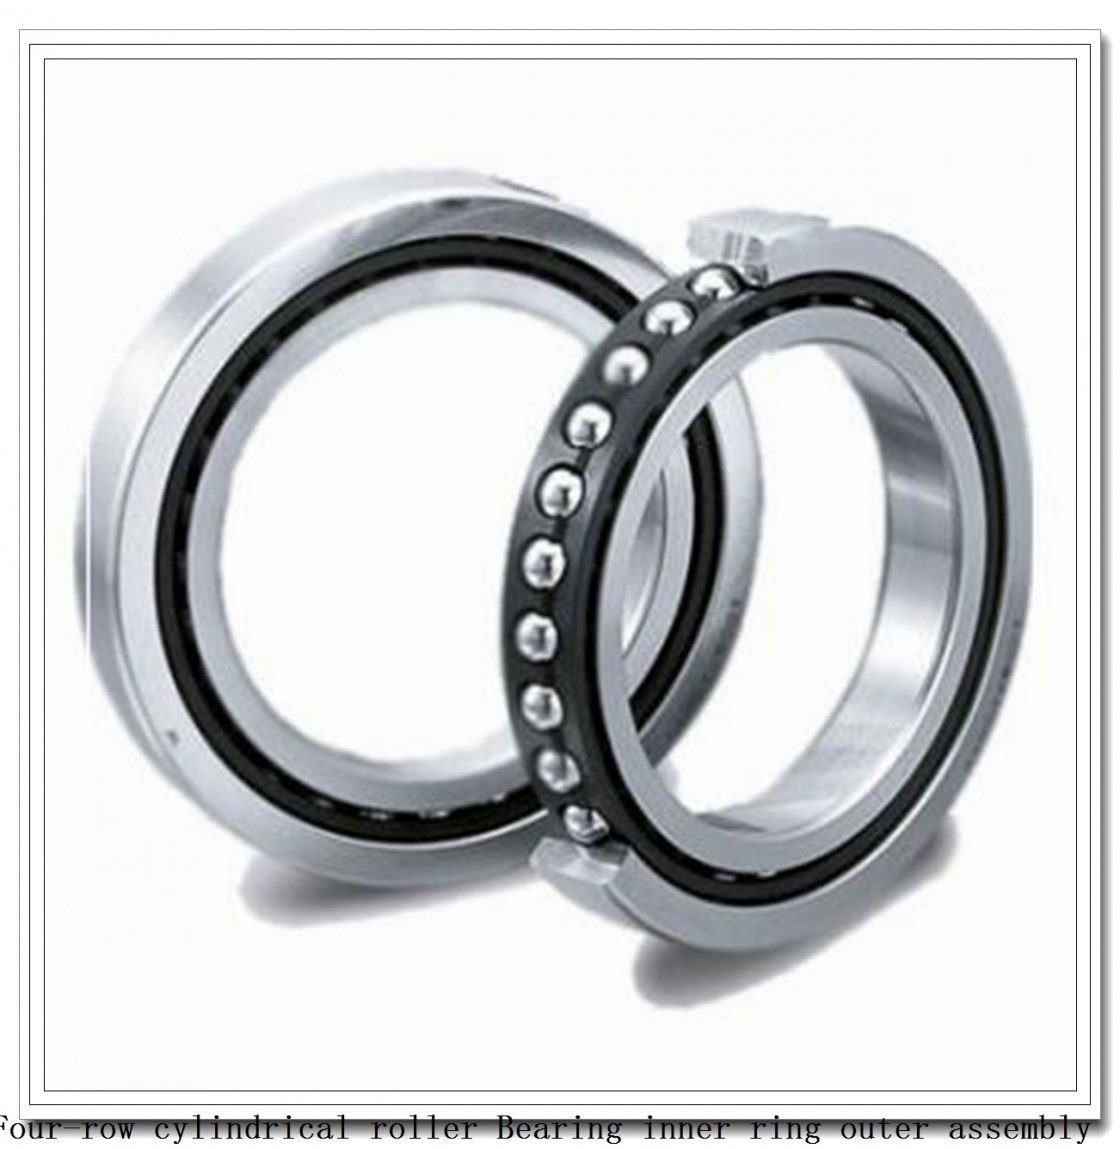 650arXs2803 704rXs2803 four-row cylindrical roller Bearing inner ring outer assembly